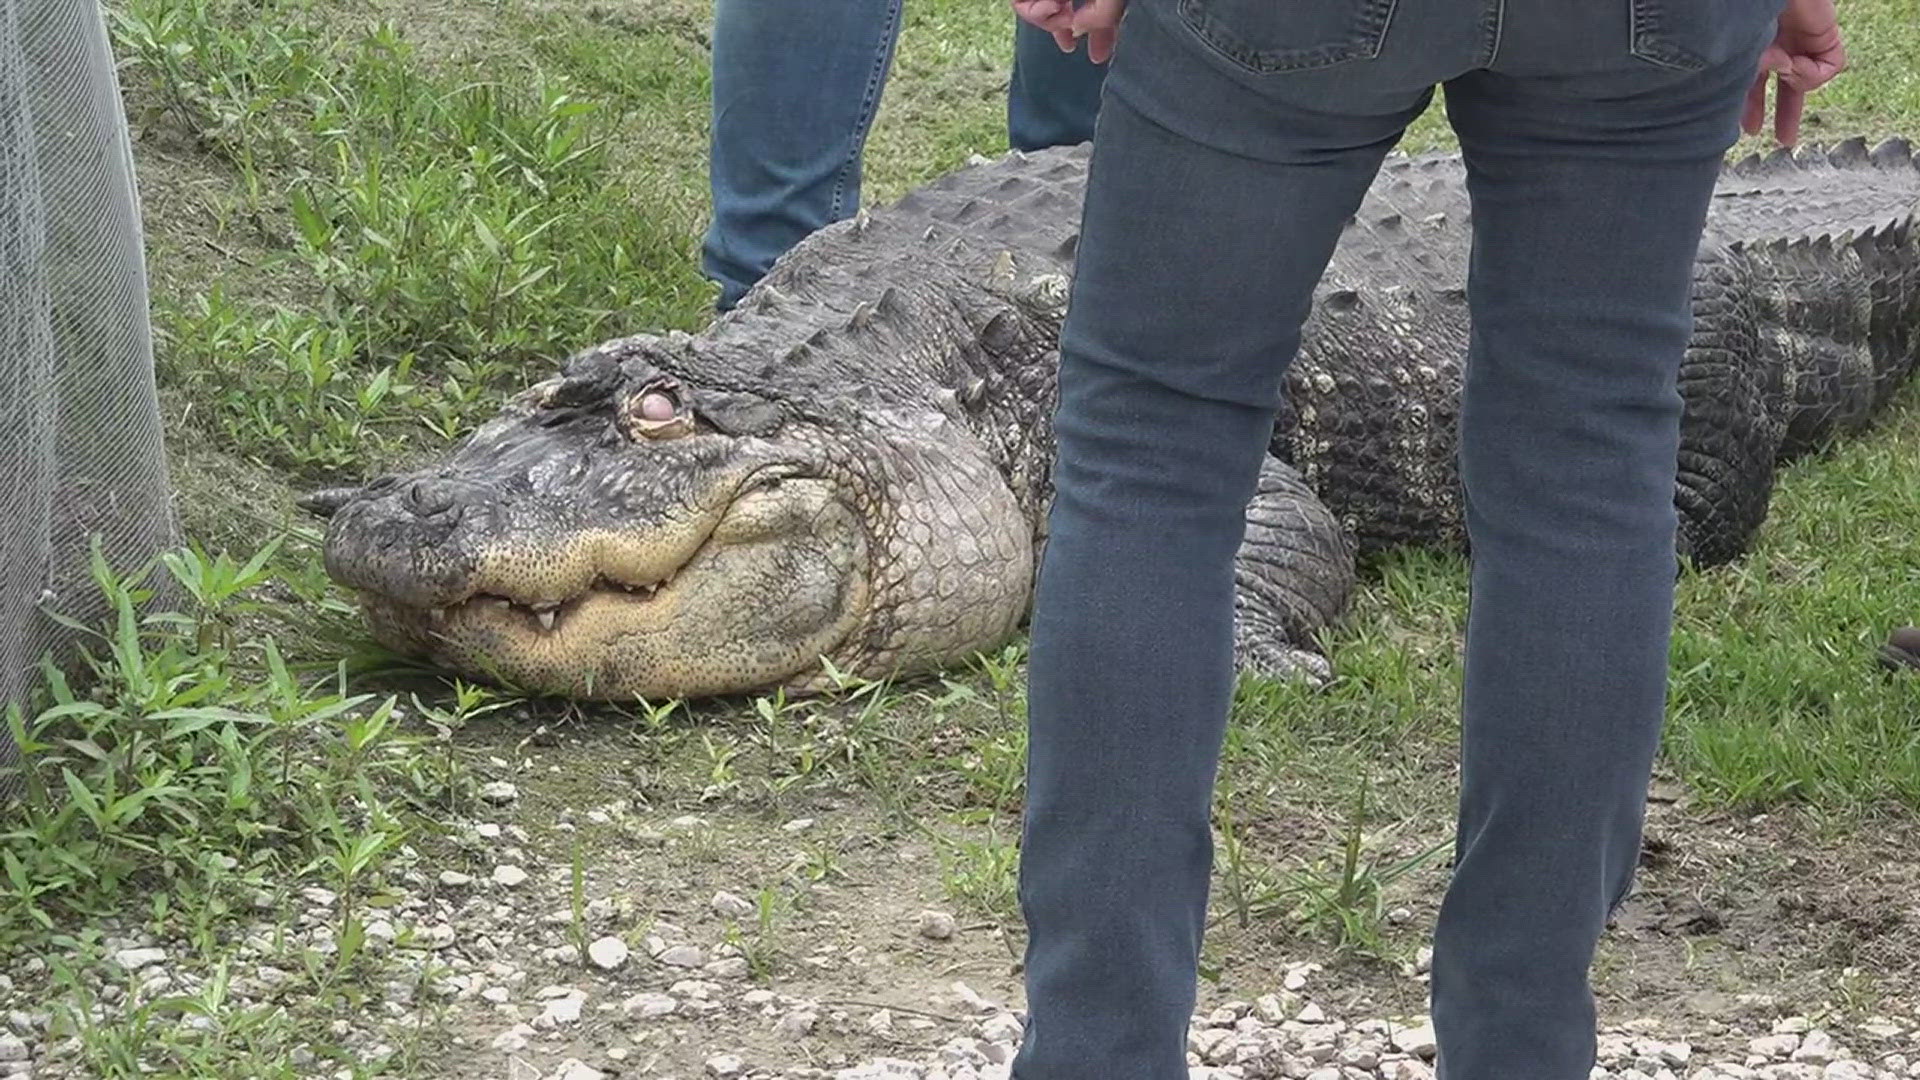 The gator was seized from his owner near Buffalo, NY, in March 2024, by the New York State Department of Environmental Conservation.